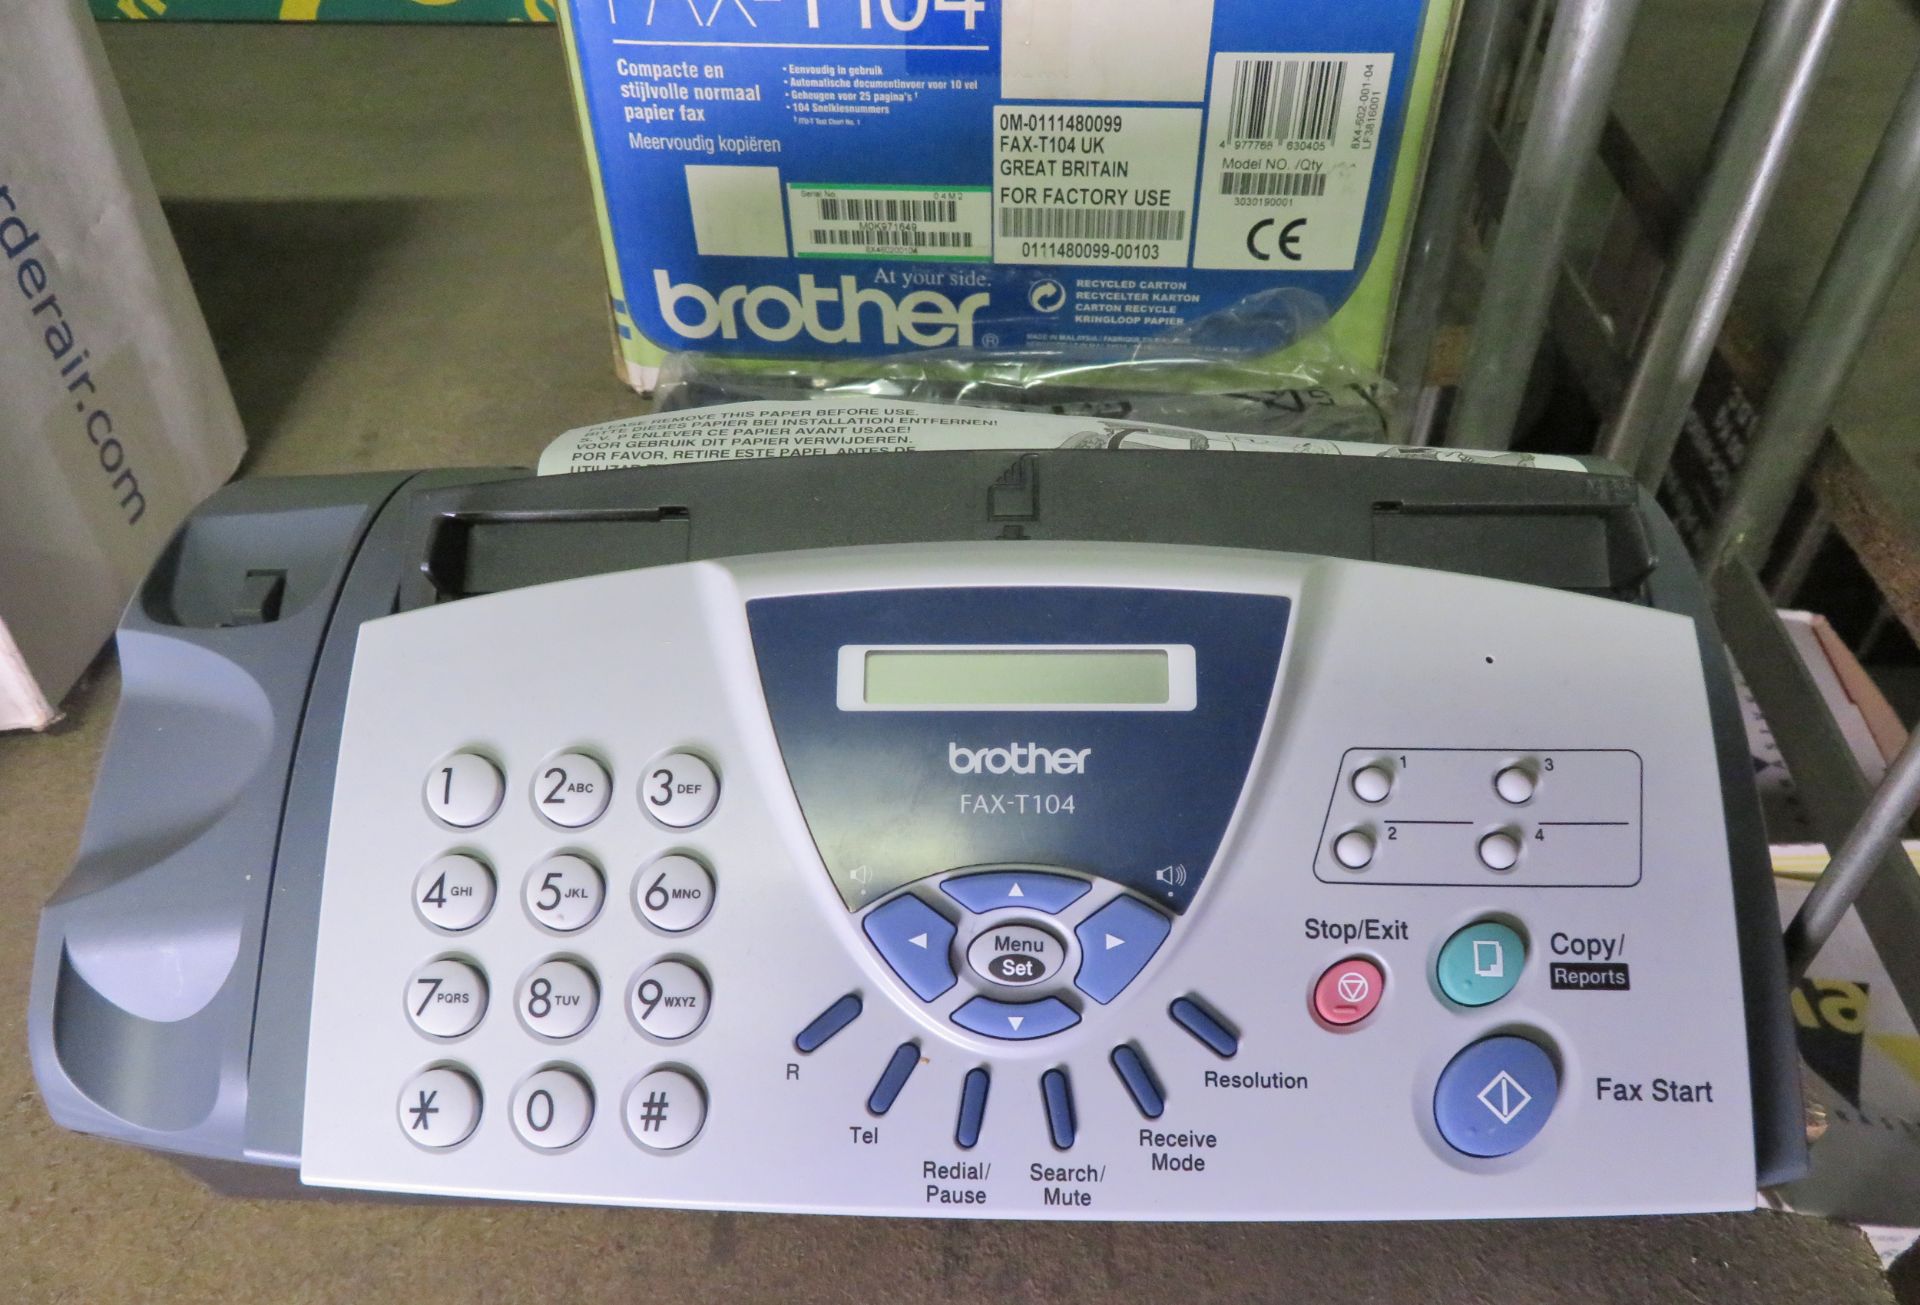 Brother Fax-T104 fax machine - Image 2 of 3